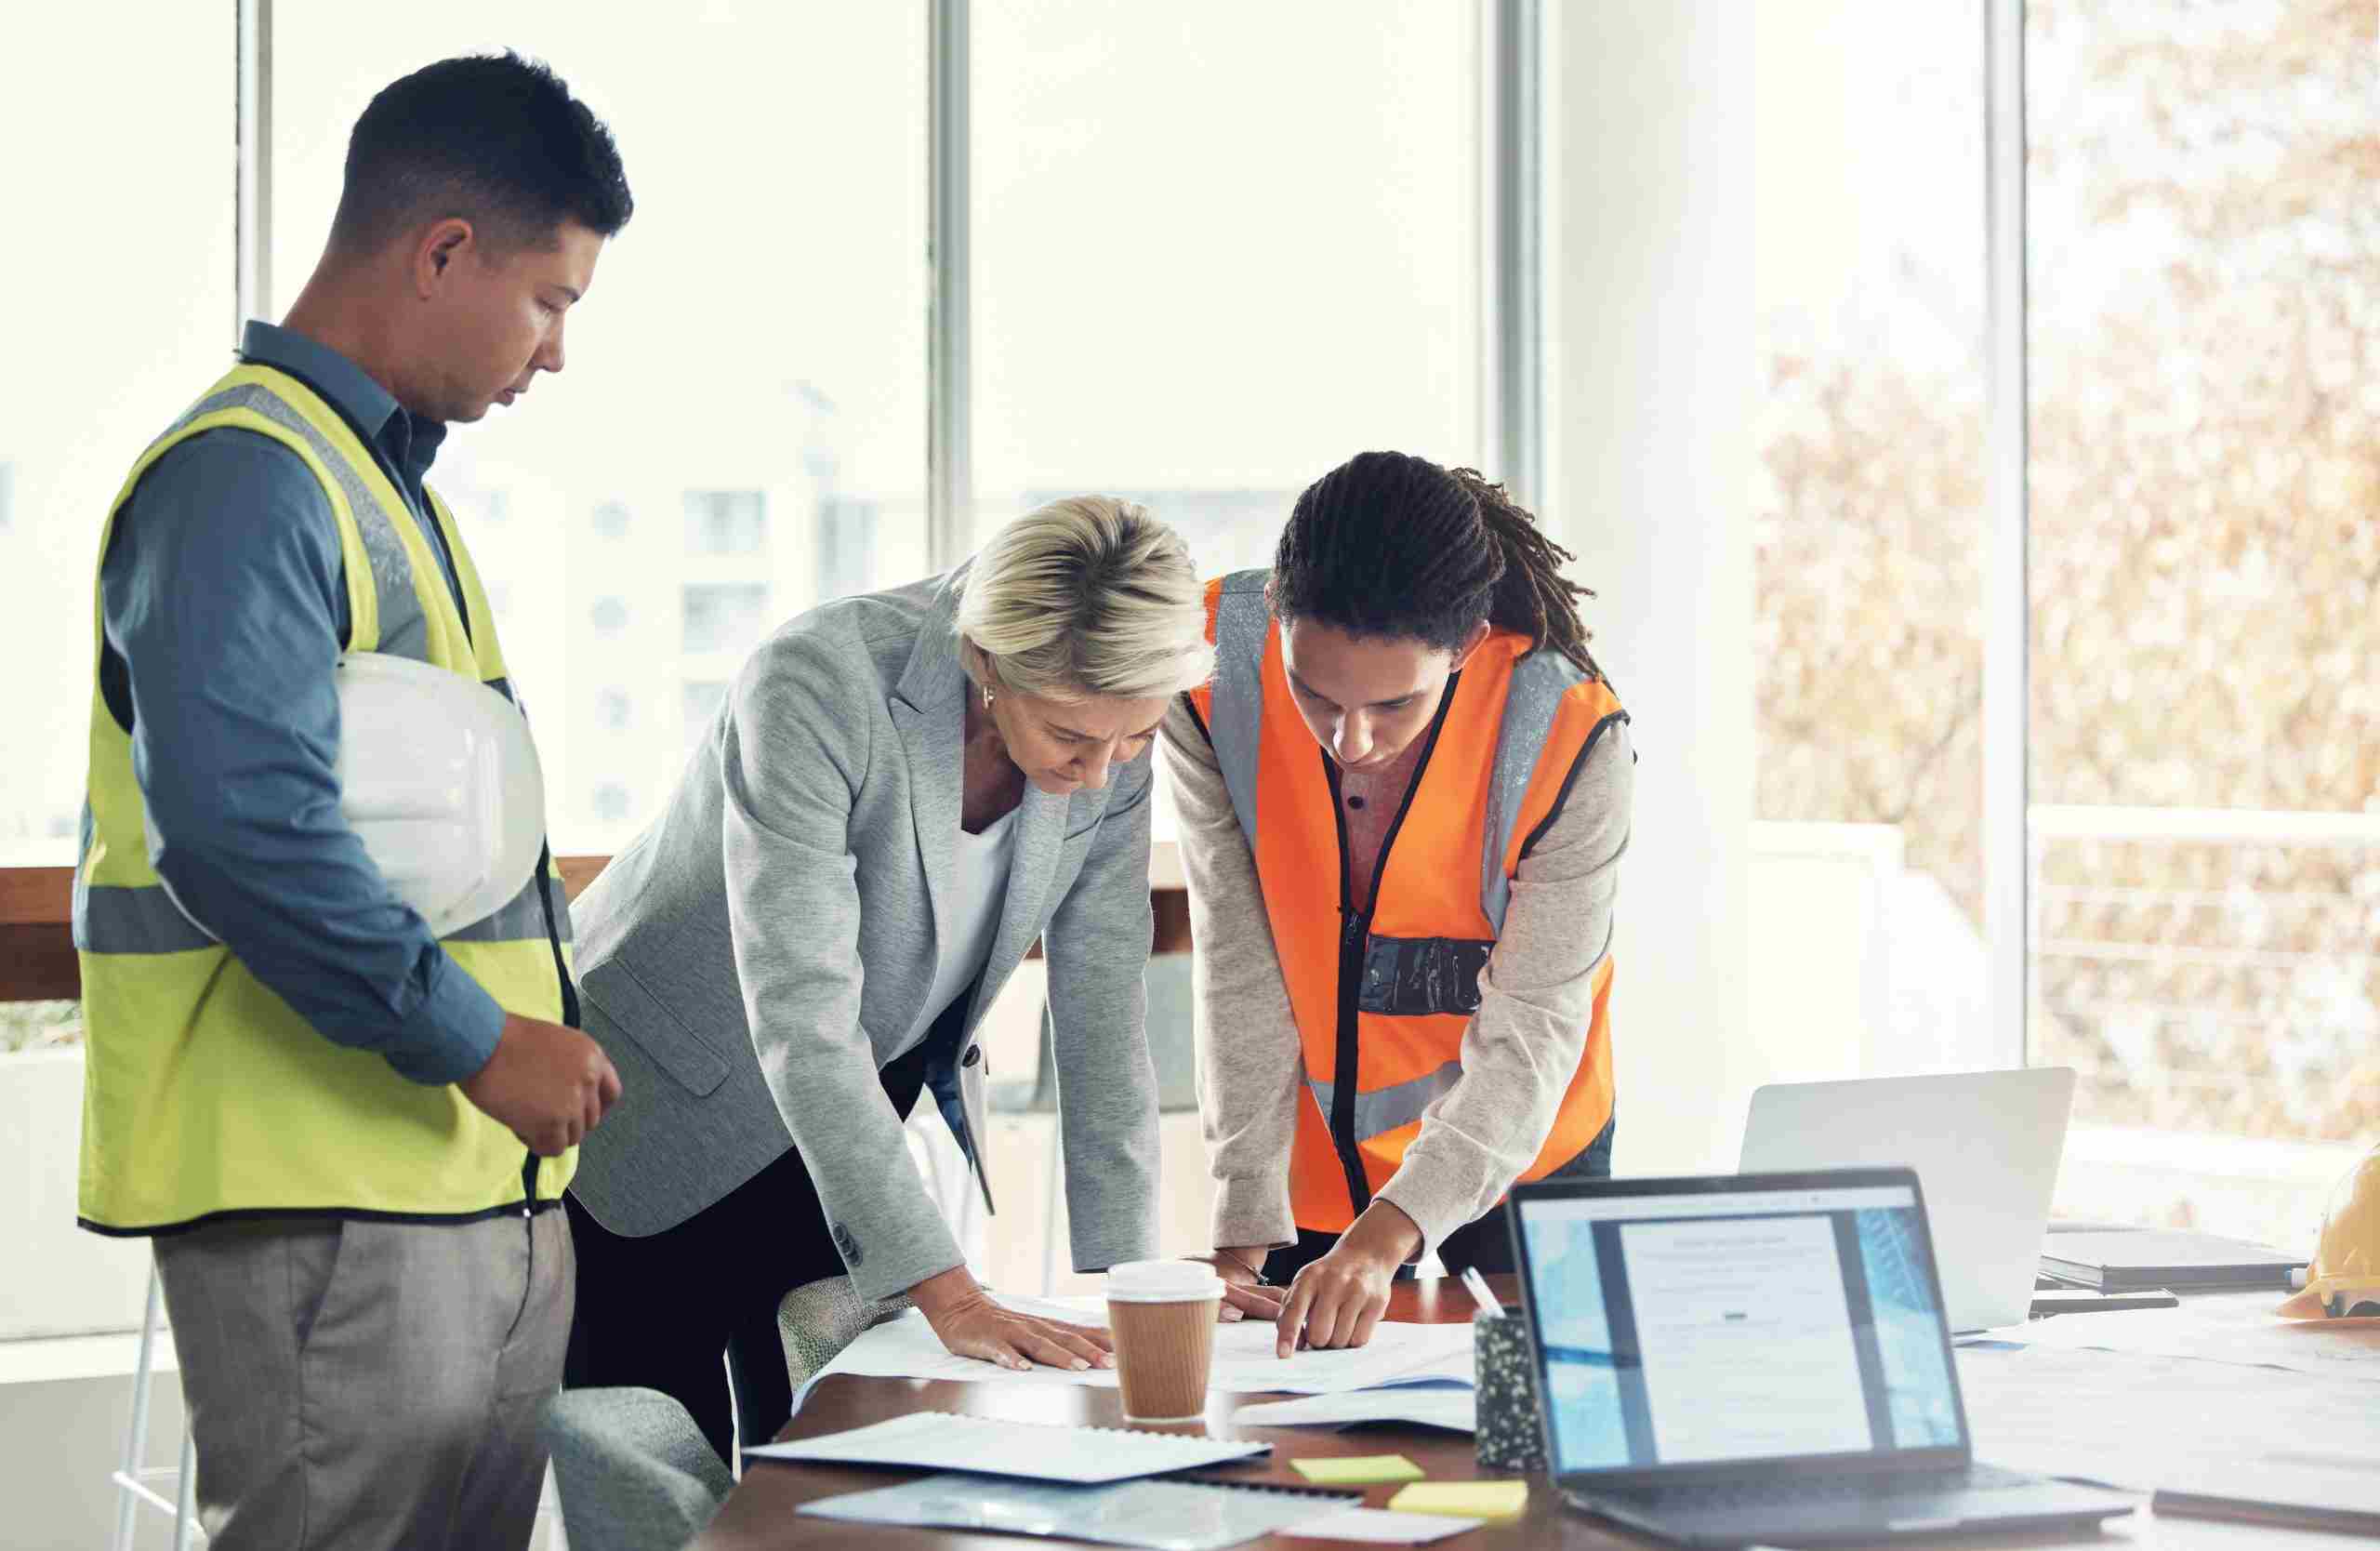 Construction workers reviewing construction reports on a desk